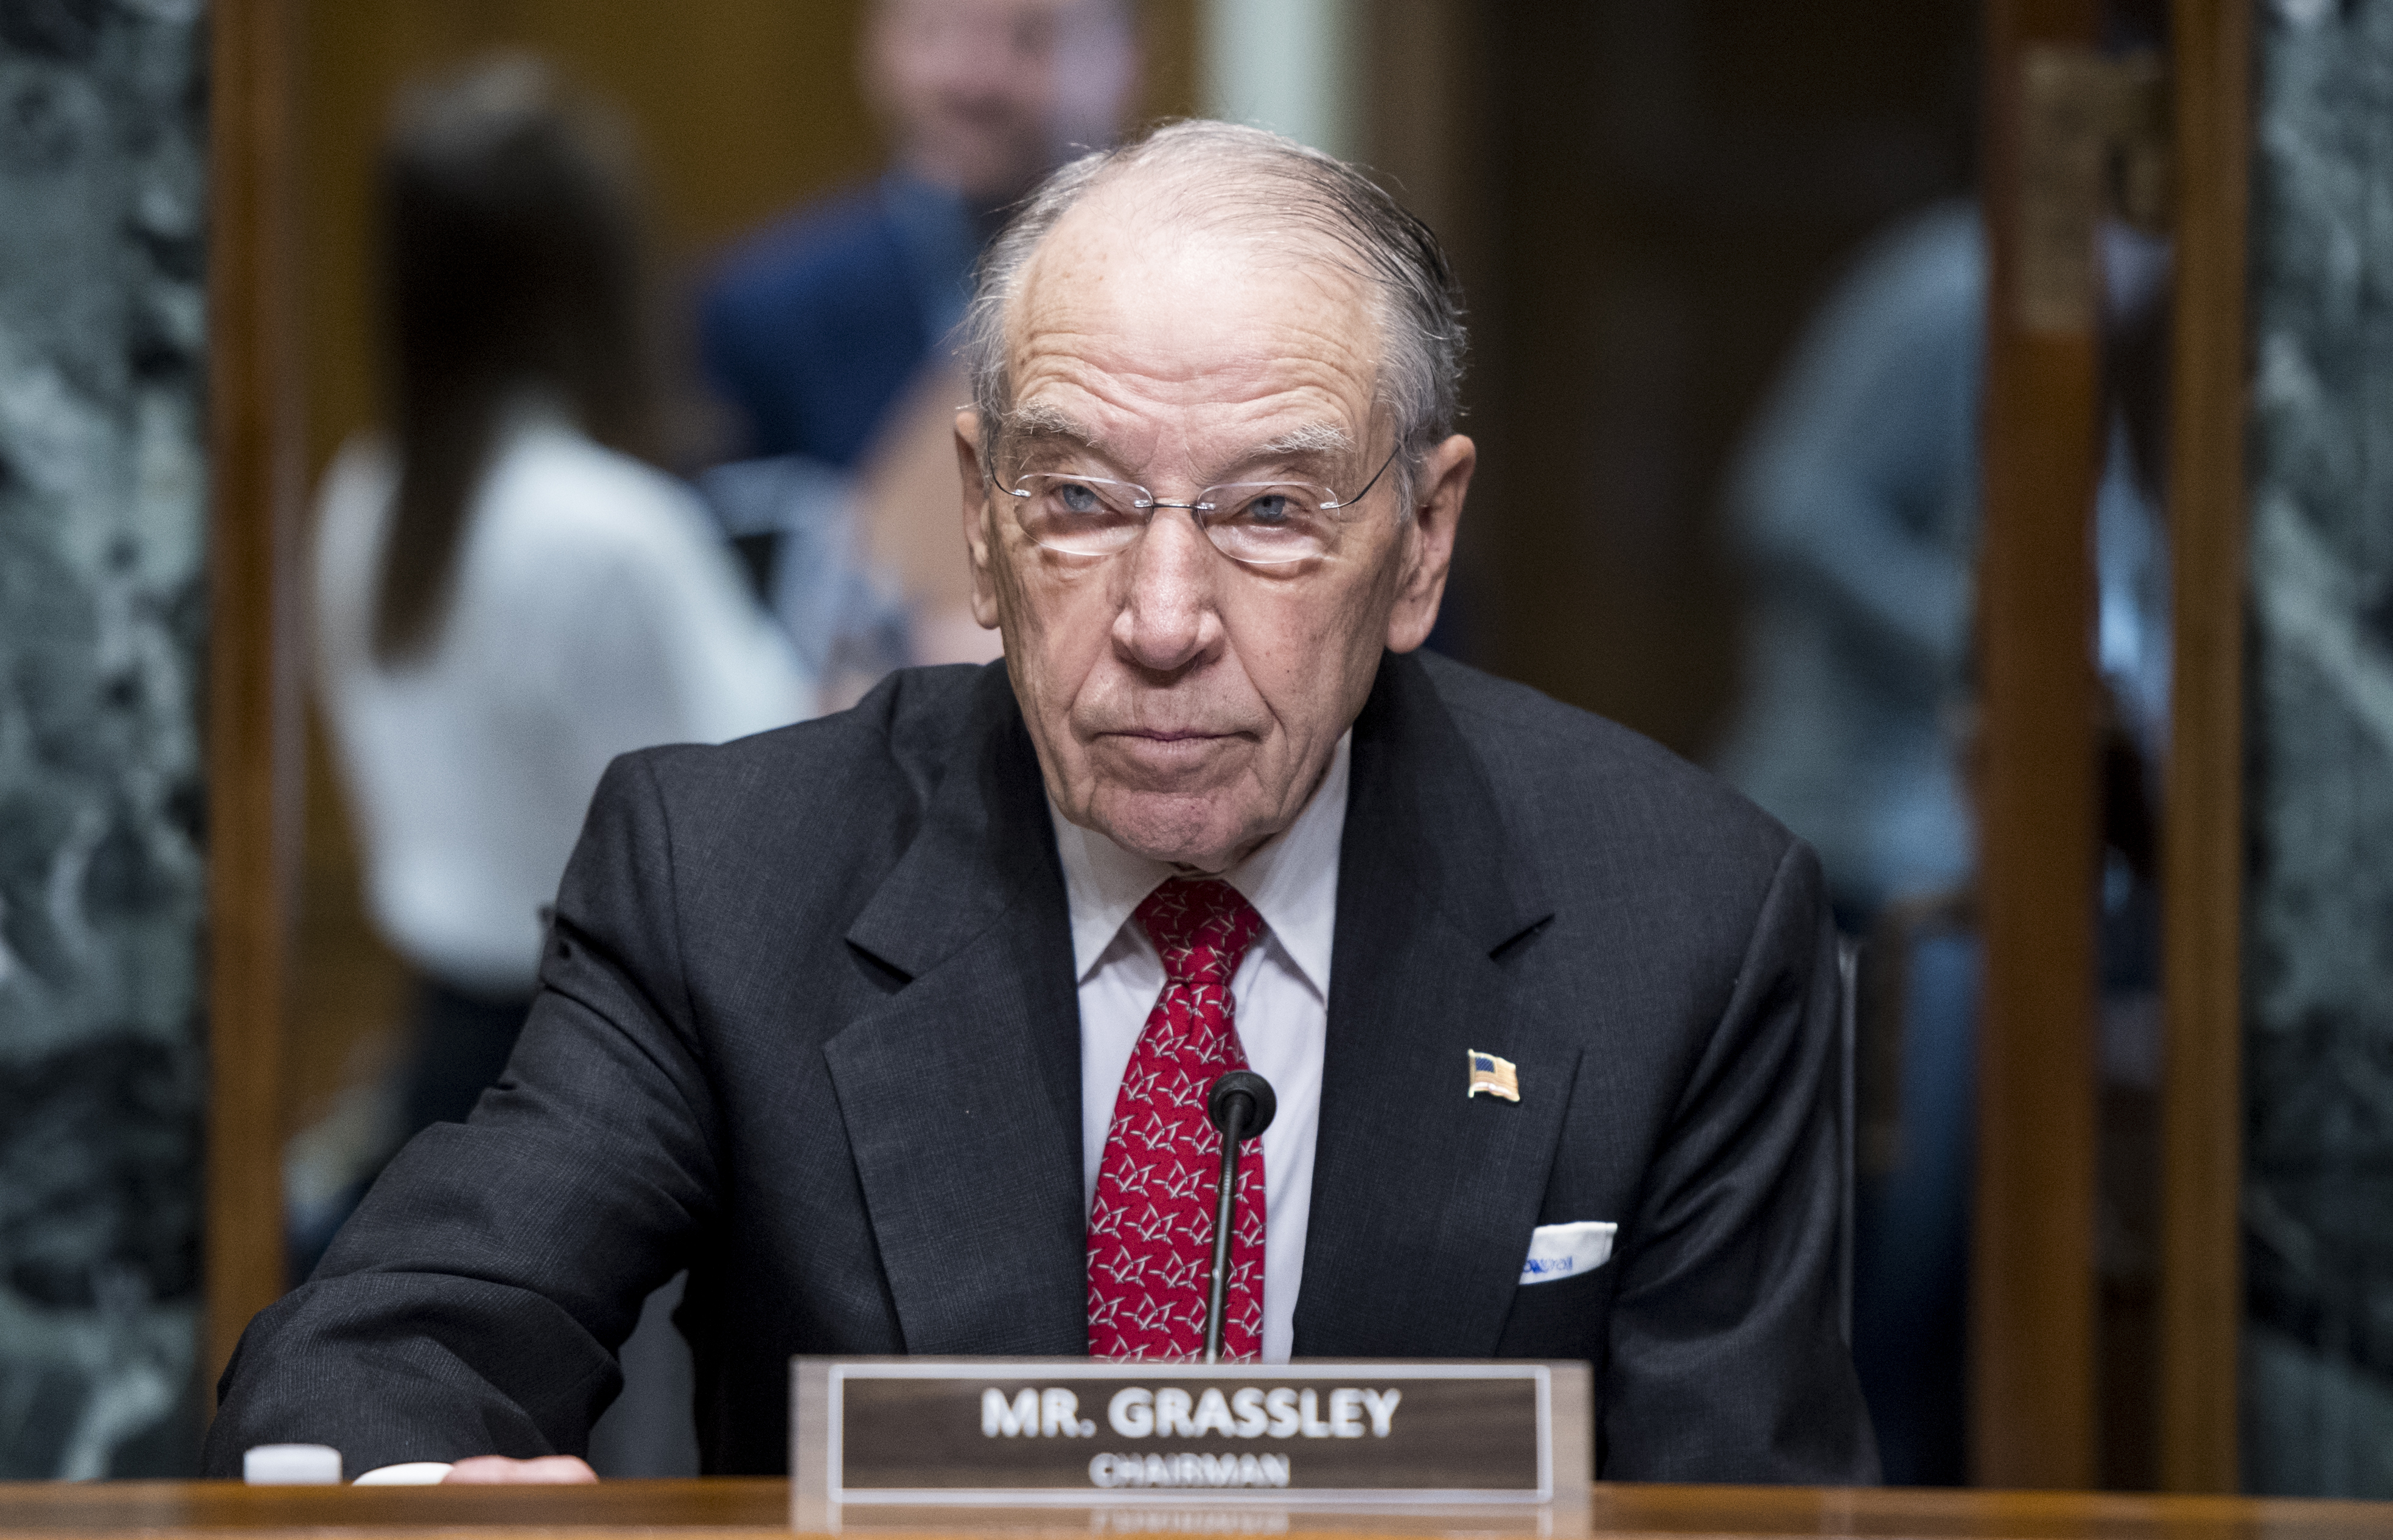 Grassley Swipes At Trump For 'Misuse' Of Presidential Authority On Tariffs - TPM